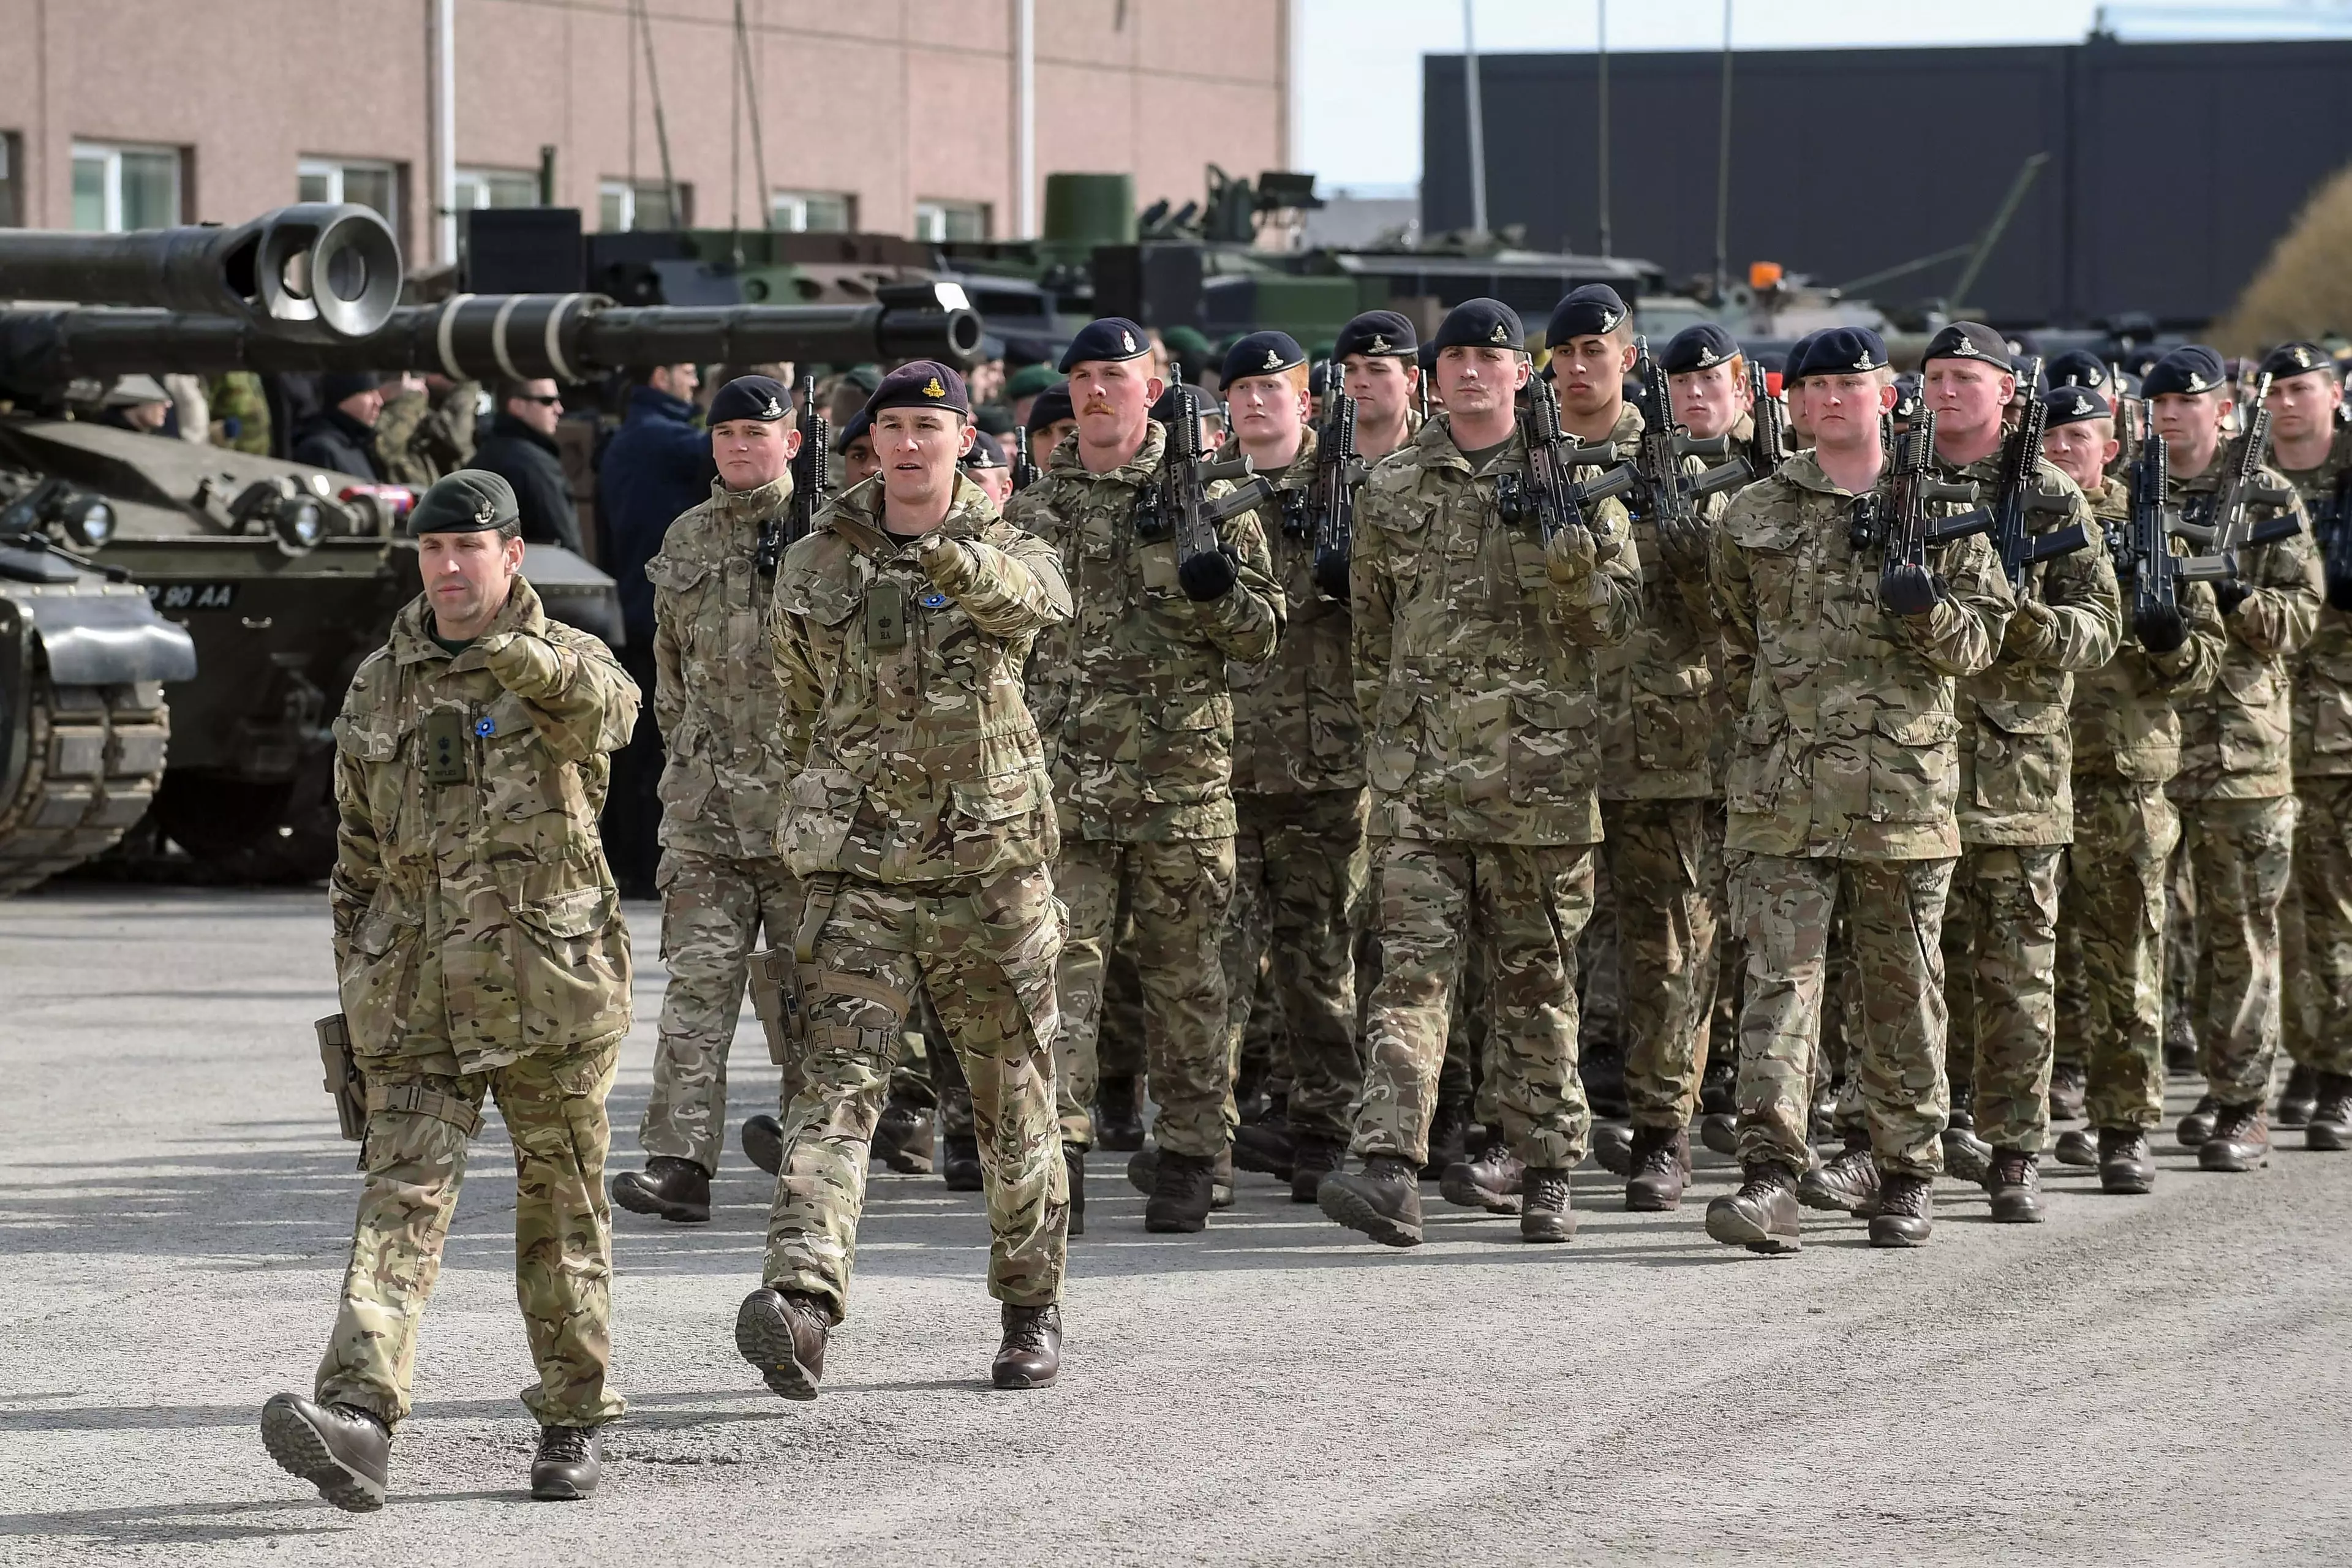 British Army soldiers on parade.